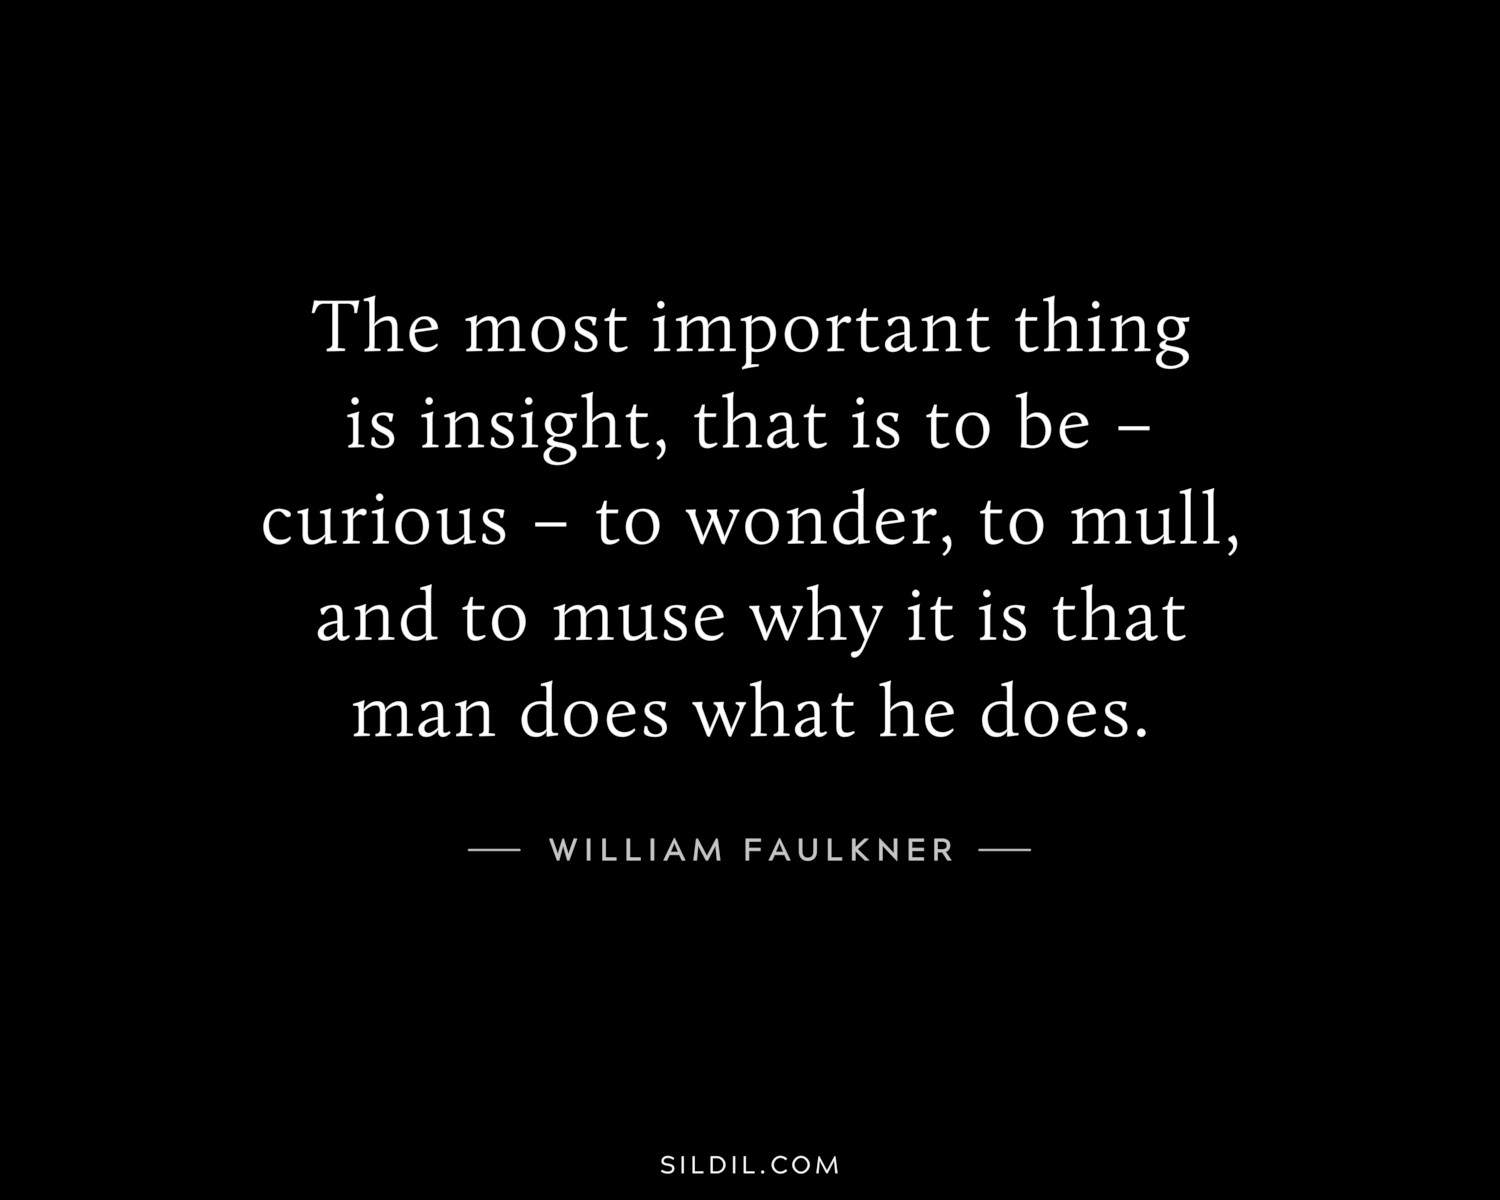 The most important thing is insight, that is to be – curious – to wonder, to mull, and to muse why it is that man does what he does.